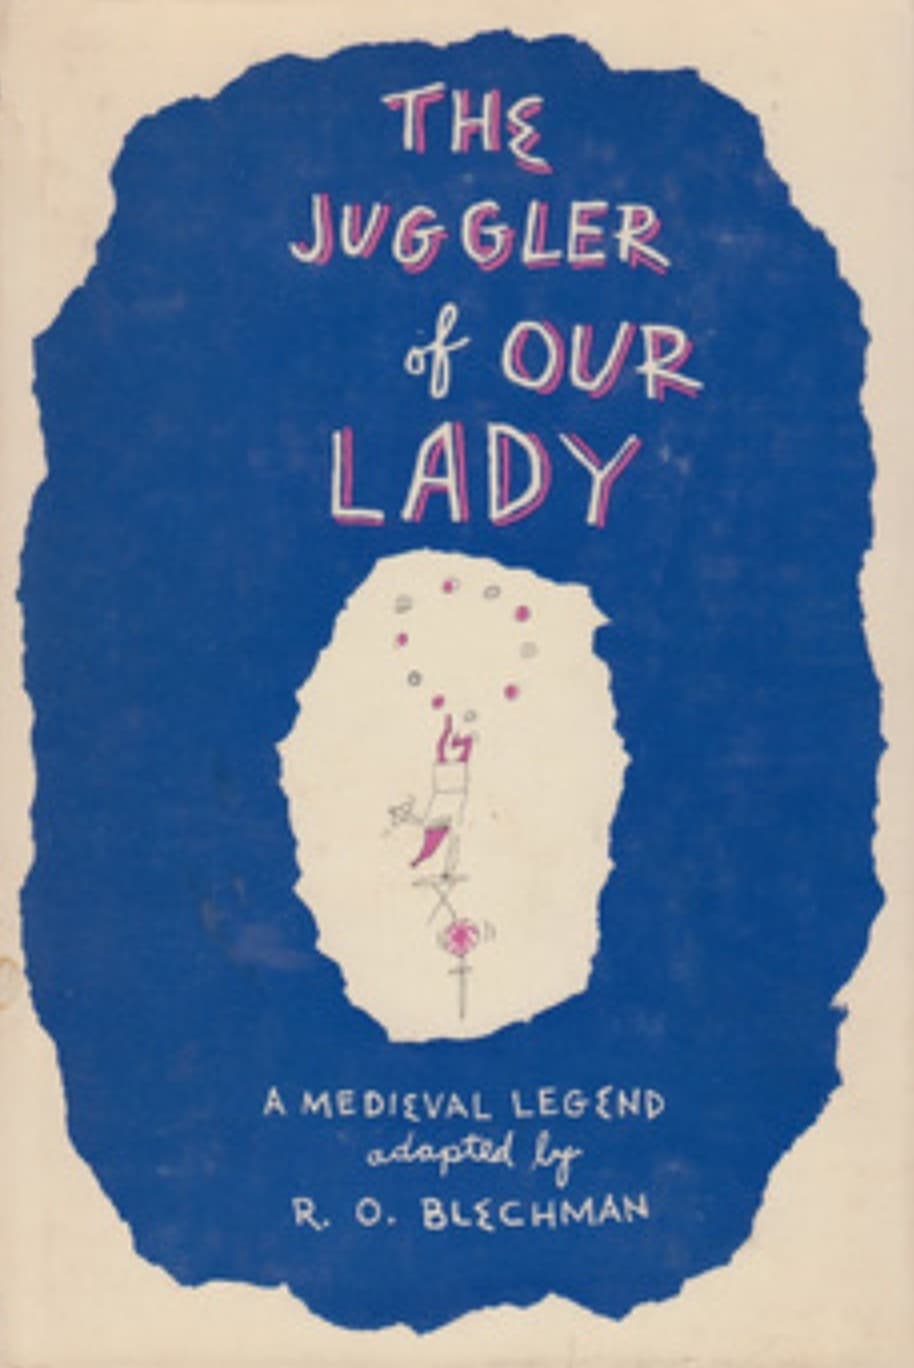 The Juggler of Our Lady (1957)